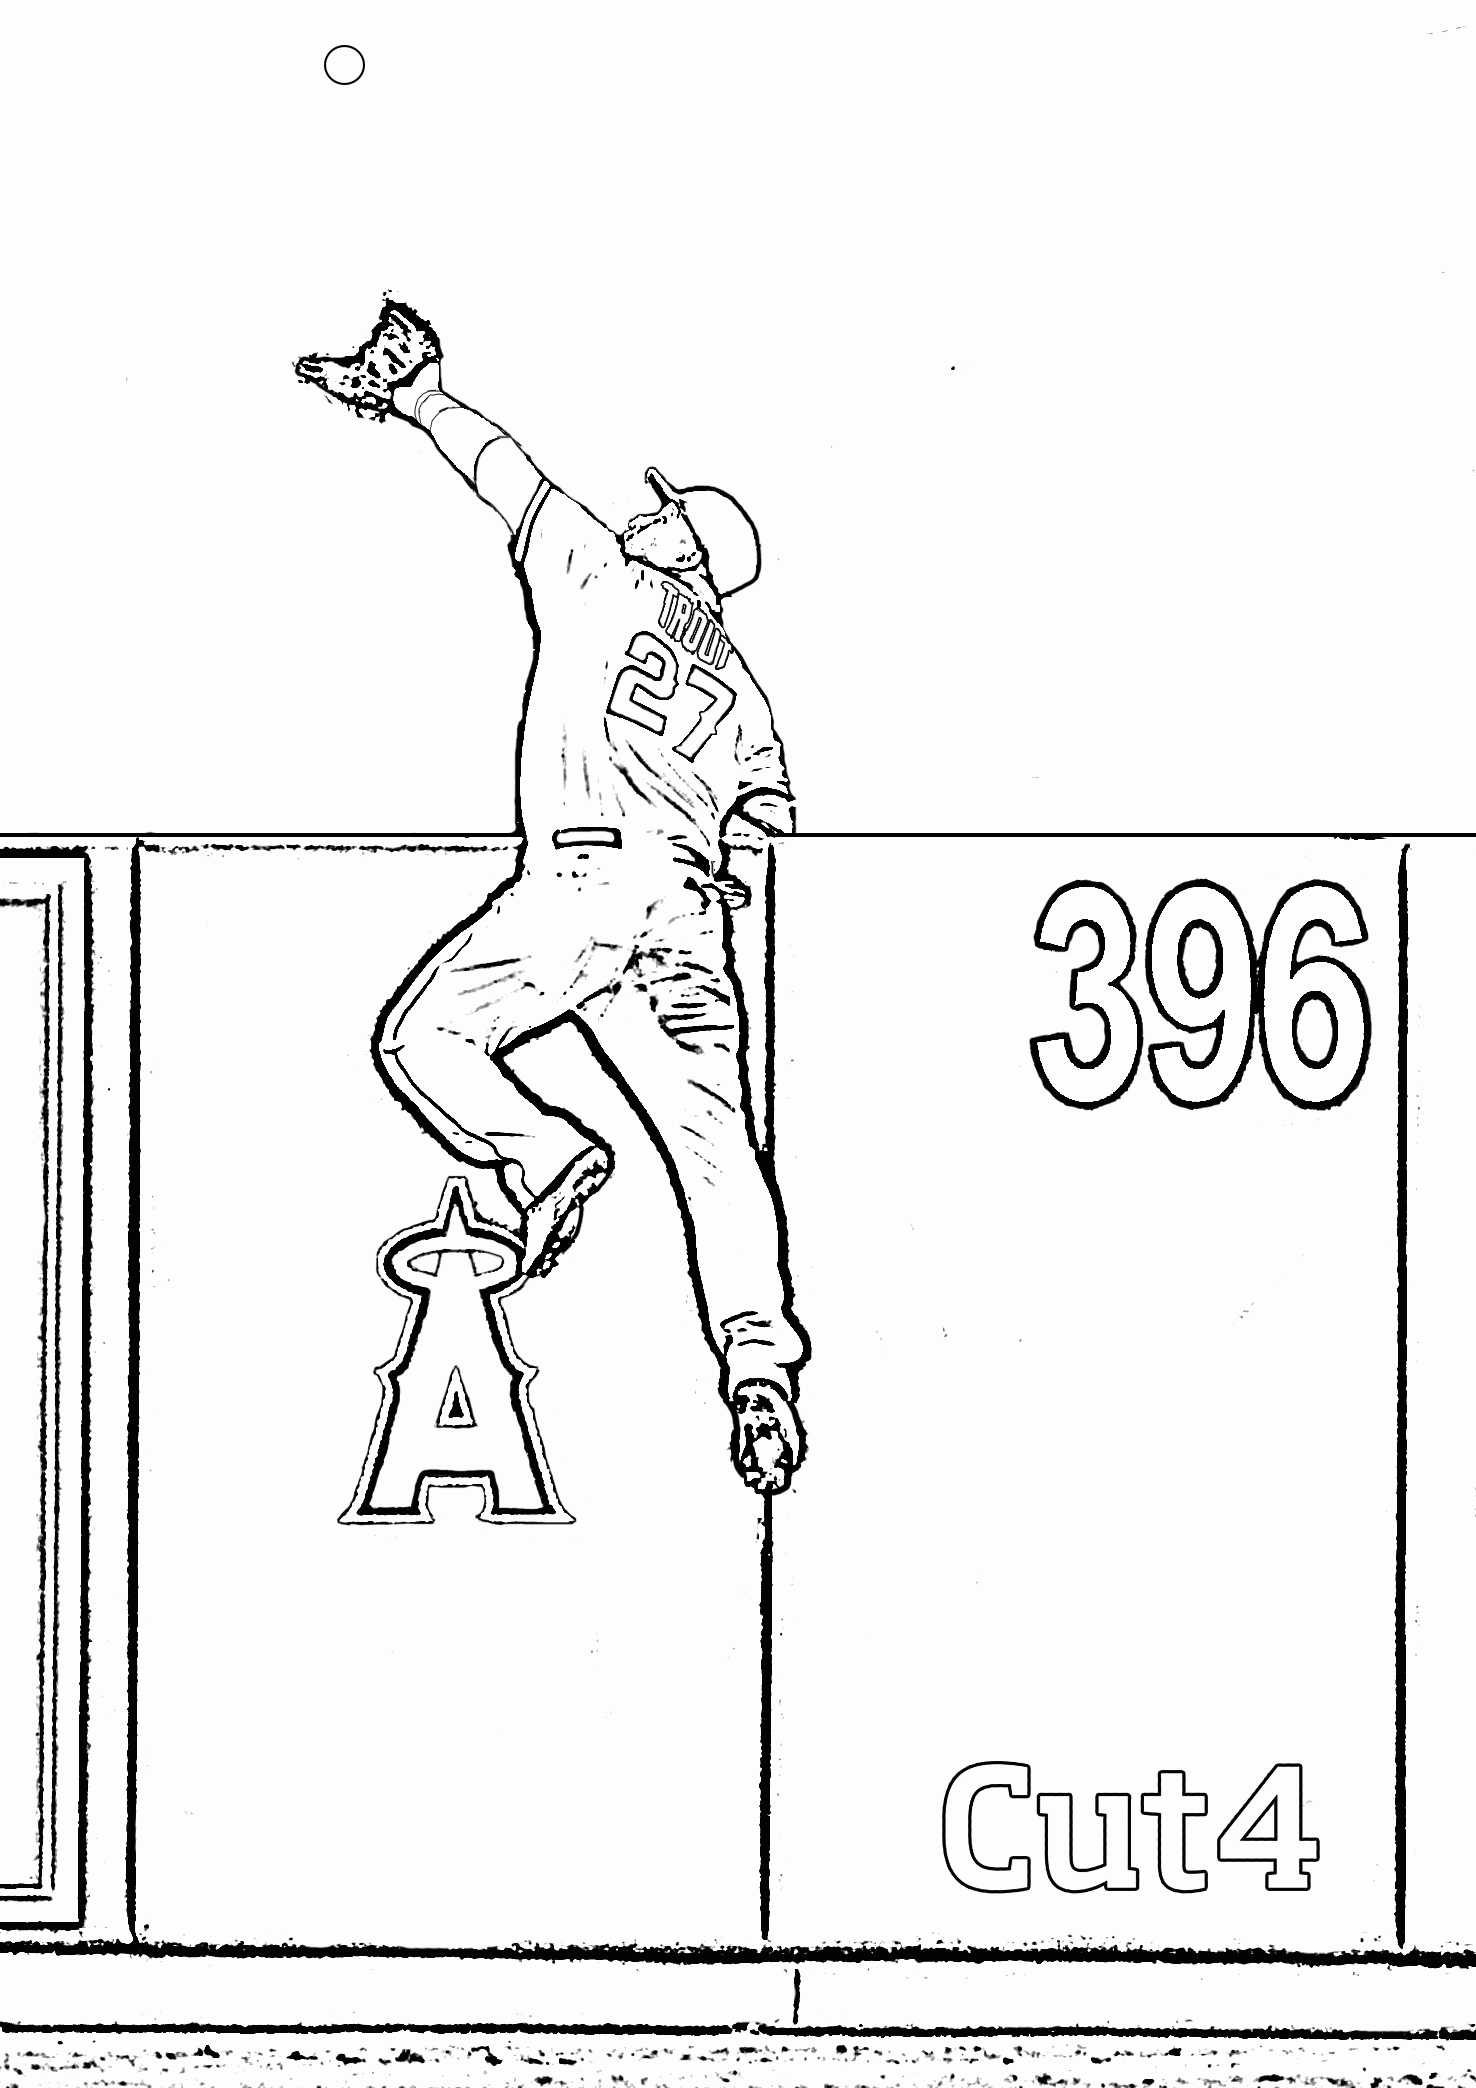 Bold Free Football Coloring Pages.